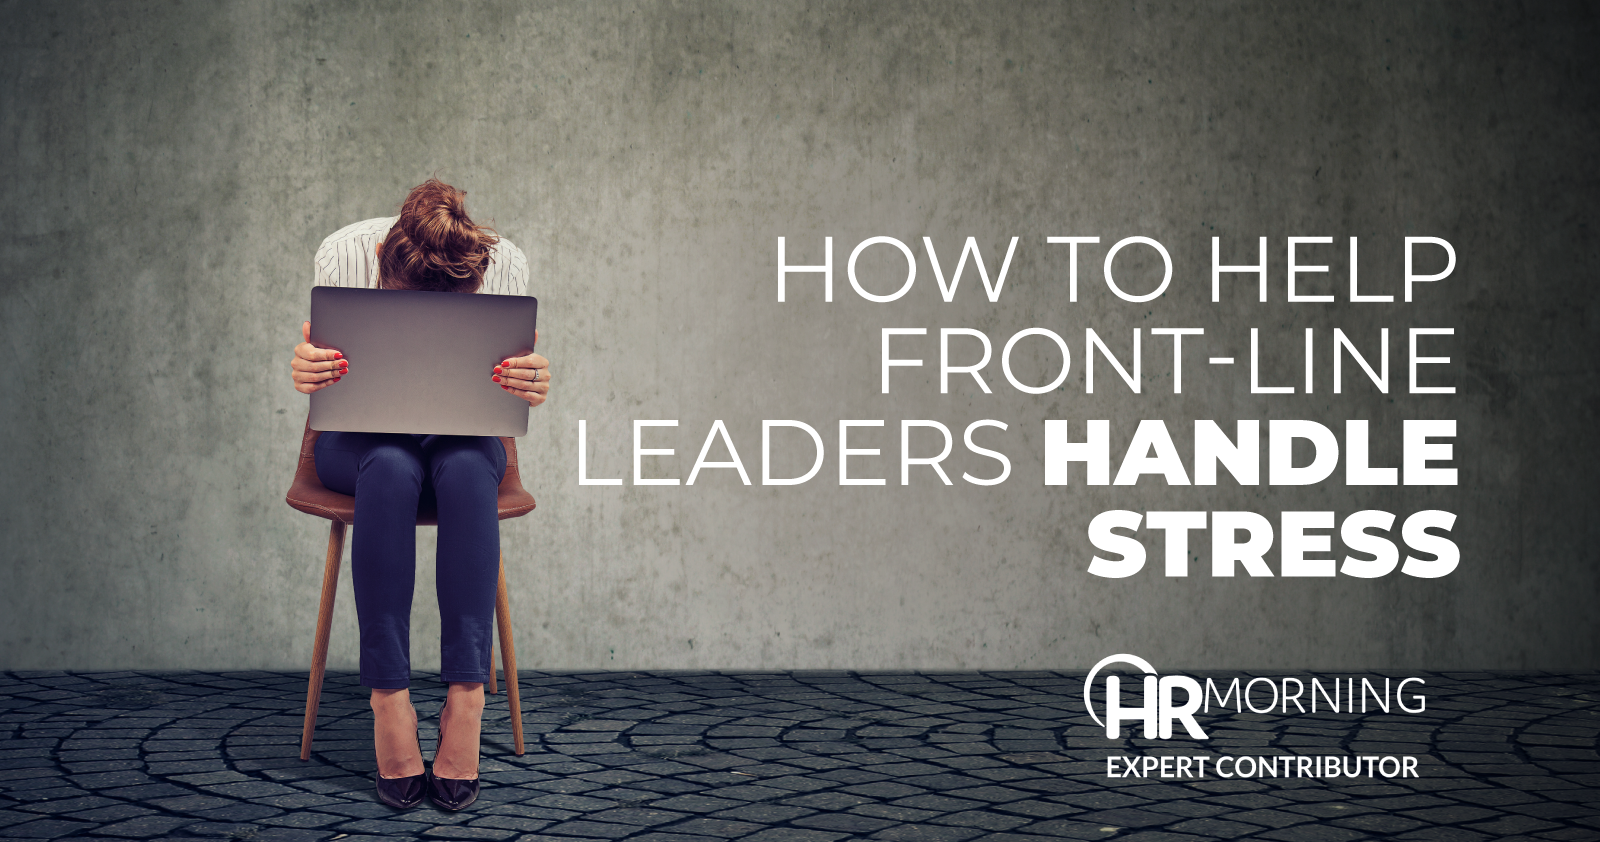 how to help front-line leaders handle stress